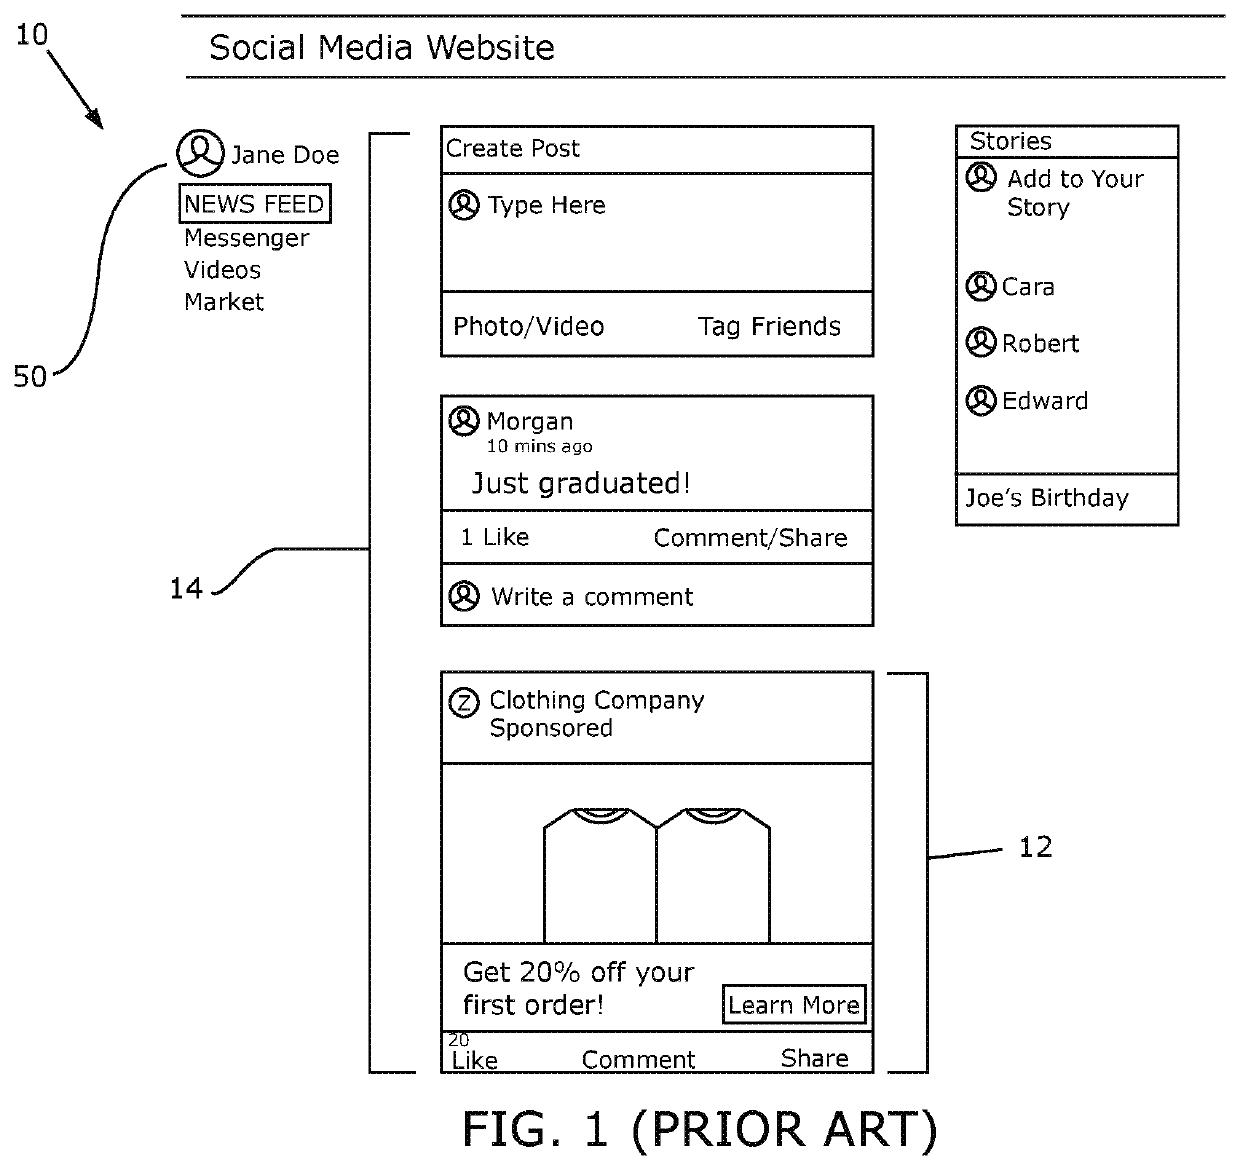 System and Method for Providing Opt-In Digital Marketing